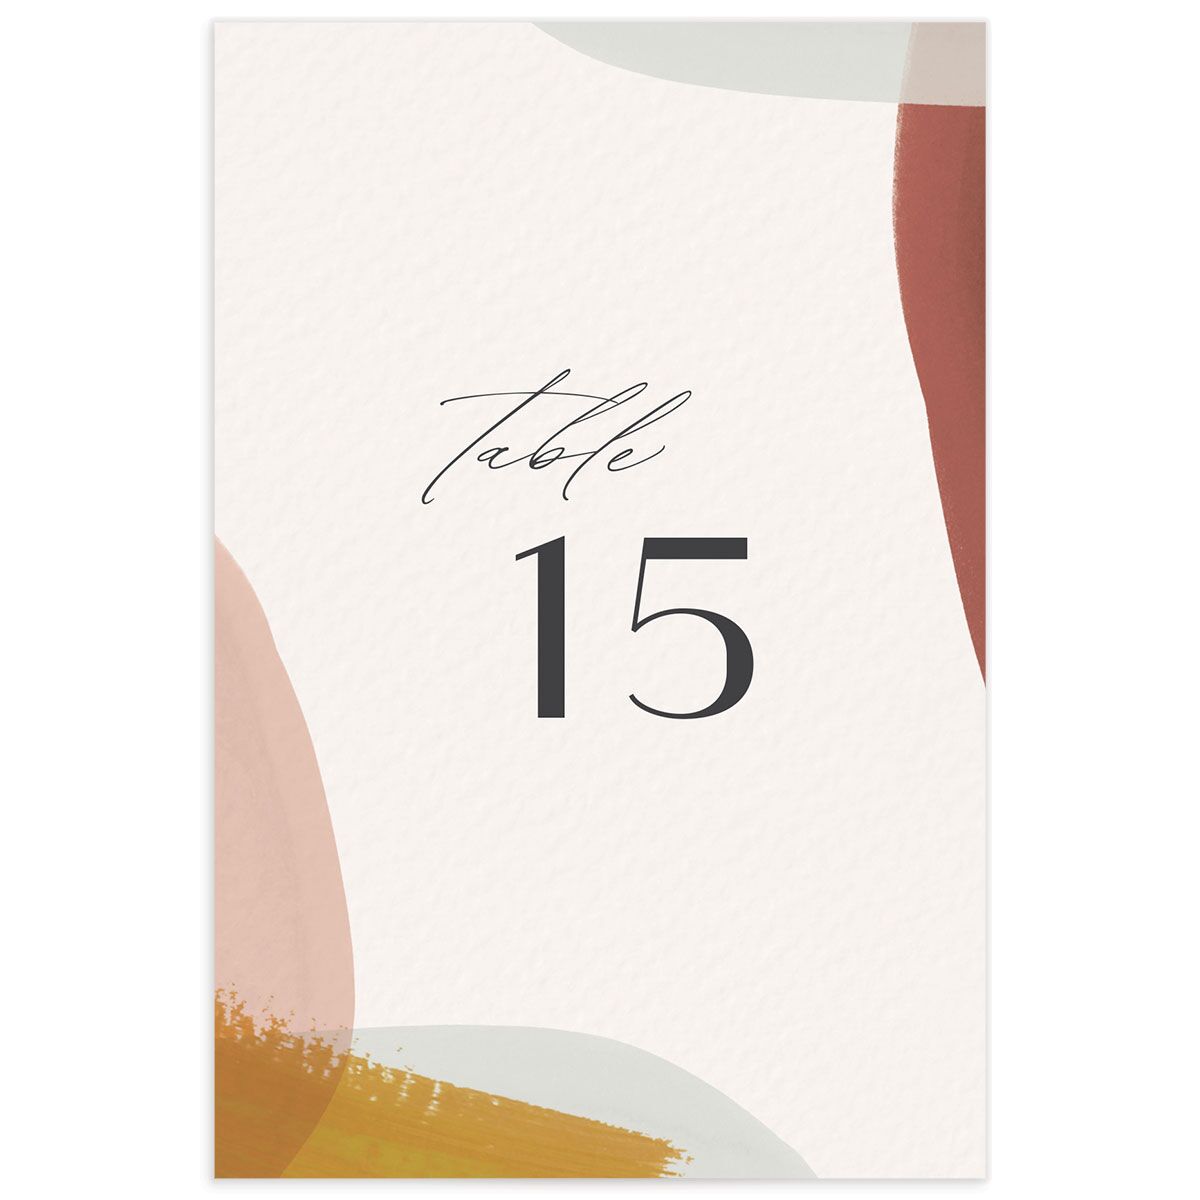 Contemporary Brushstroke Table Numbers back in Dijon